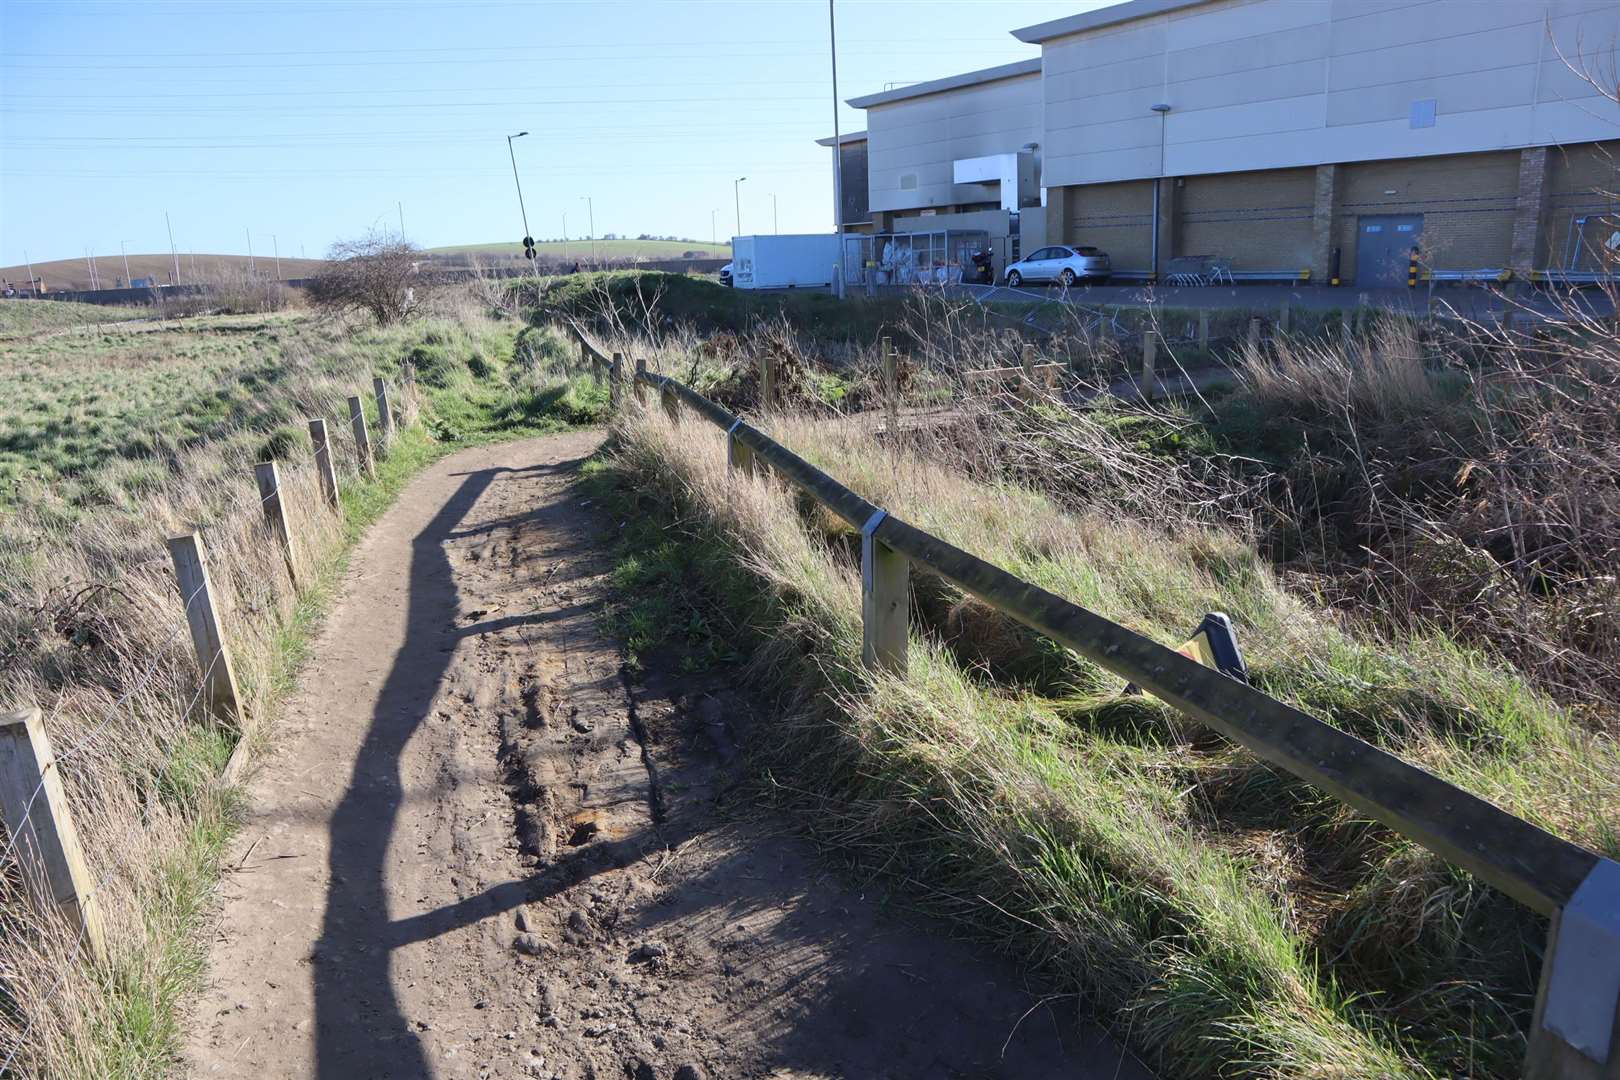 The muddy track at Neats Court retail park, Queenborough, which becomes impassable after rain. It is section C on the map